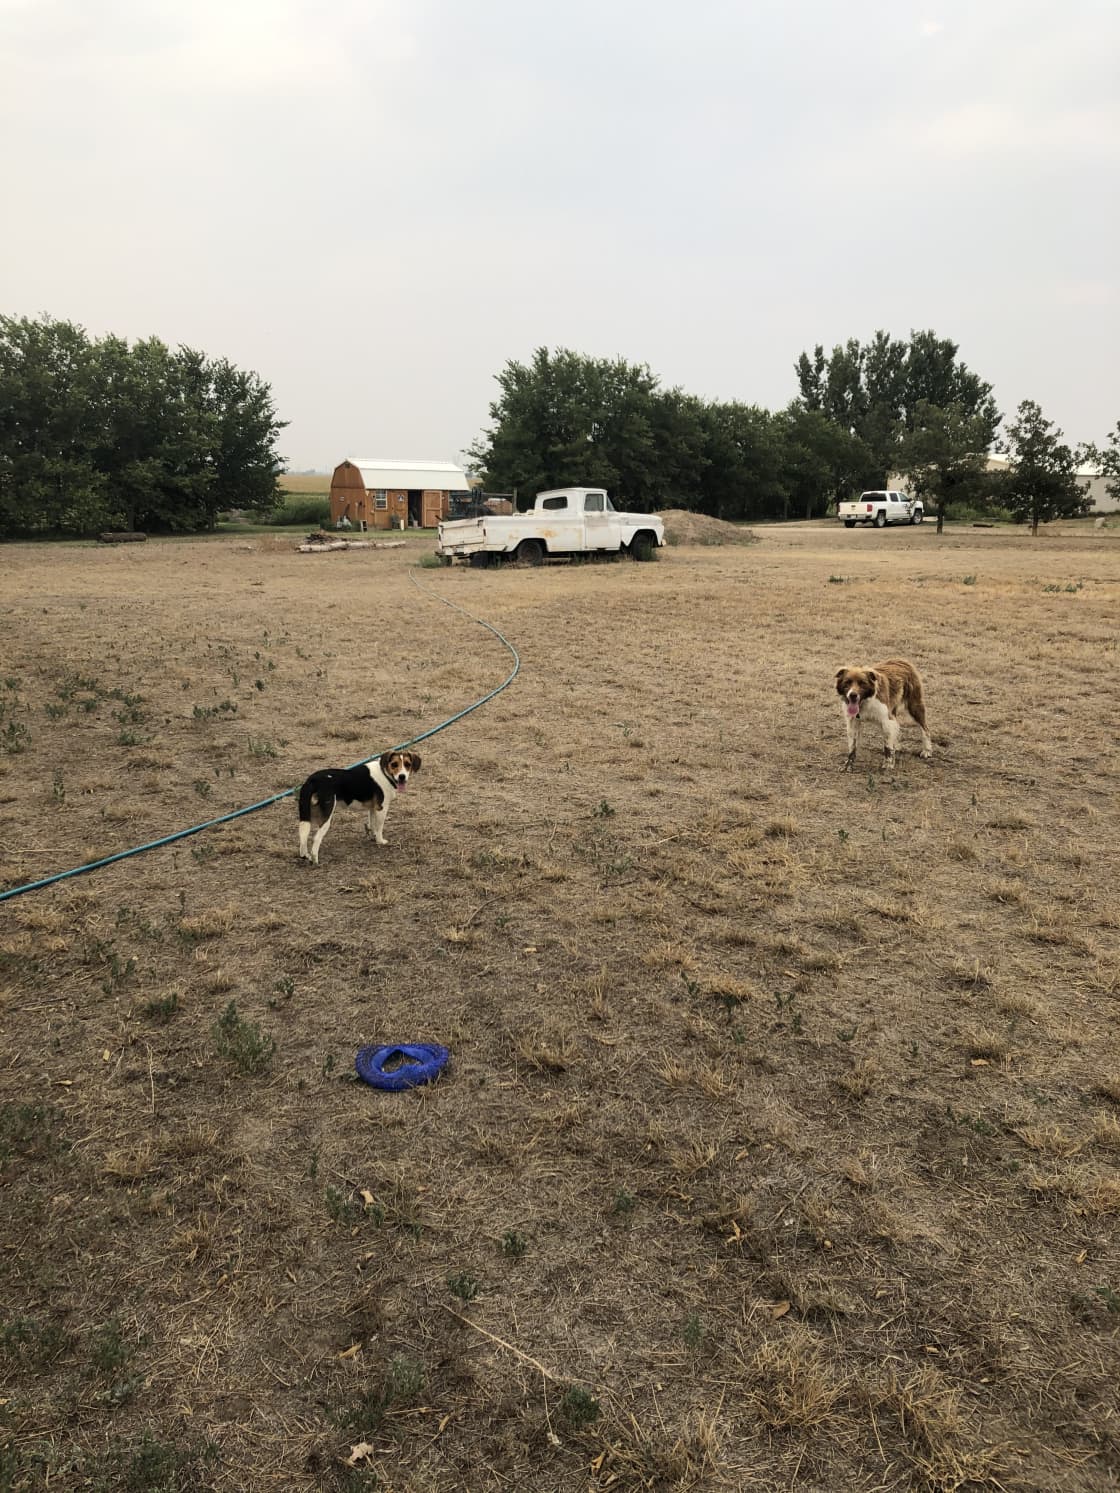 These are our pups. The larger one is Cletus, he likes playing frisbee. And the smaller one is Boots, he is a unique character. They are both extremely friendly. In the back of this photo, you can see the building that has the chicken pen attached.